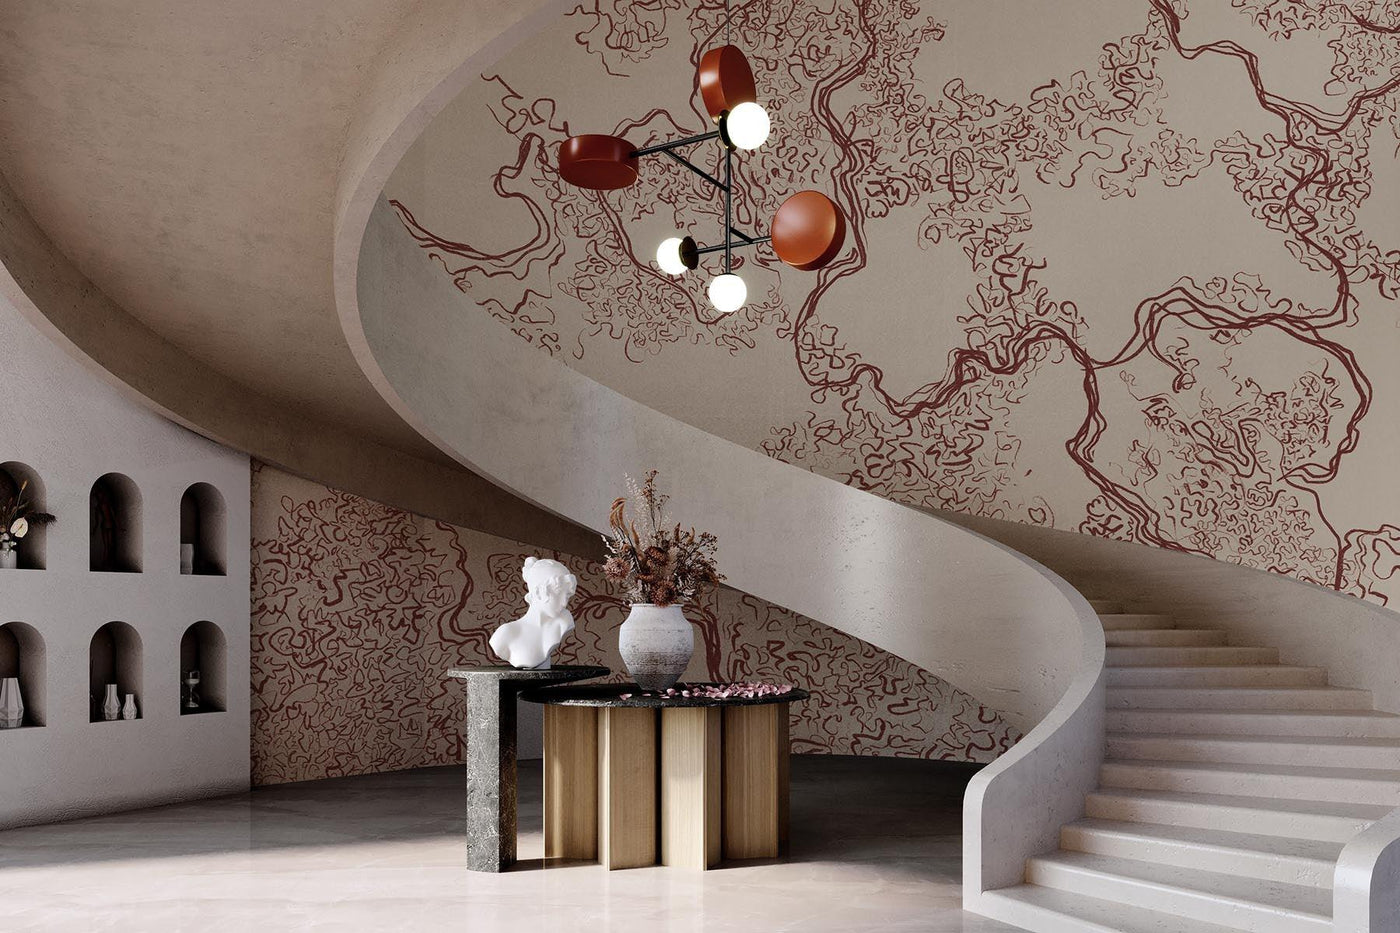 Artistic wall mural in burgundy on white on the wall of this staircase